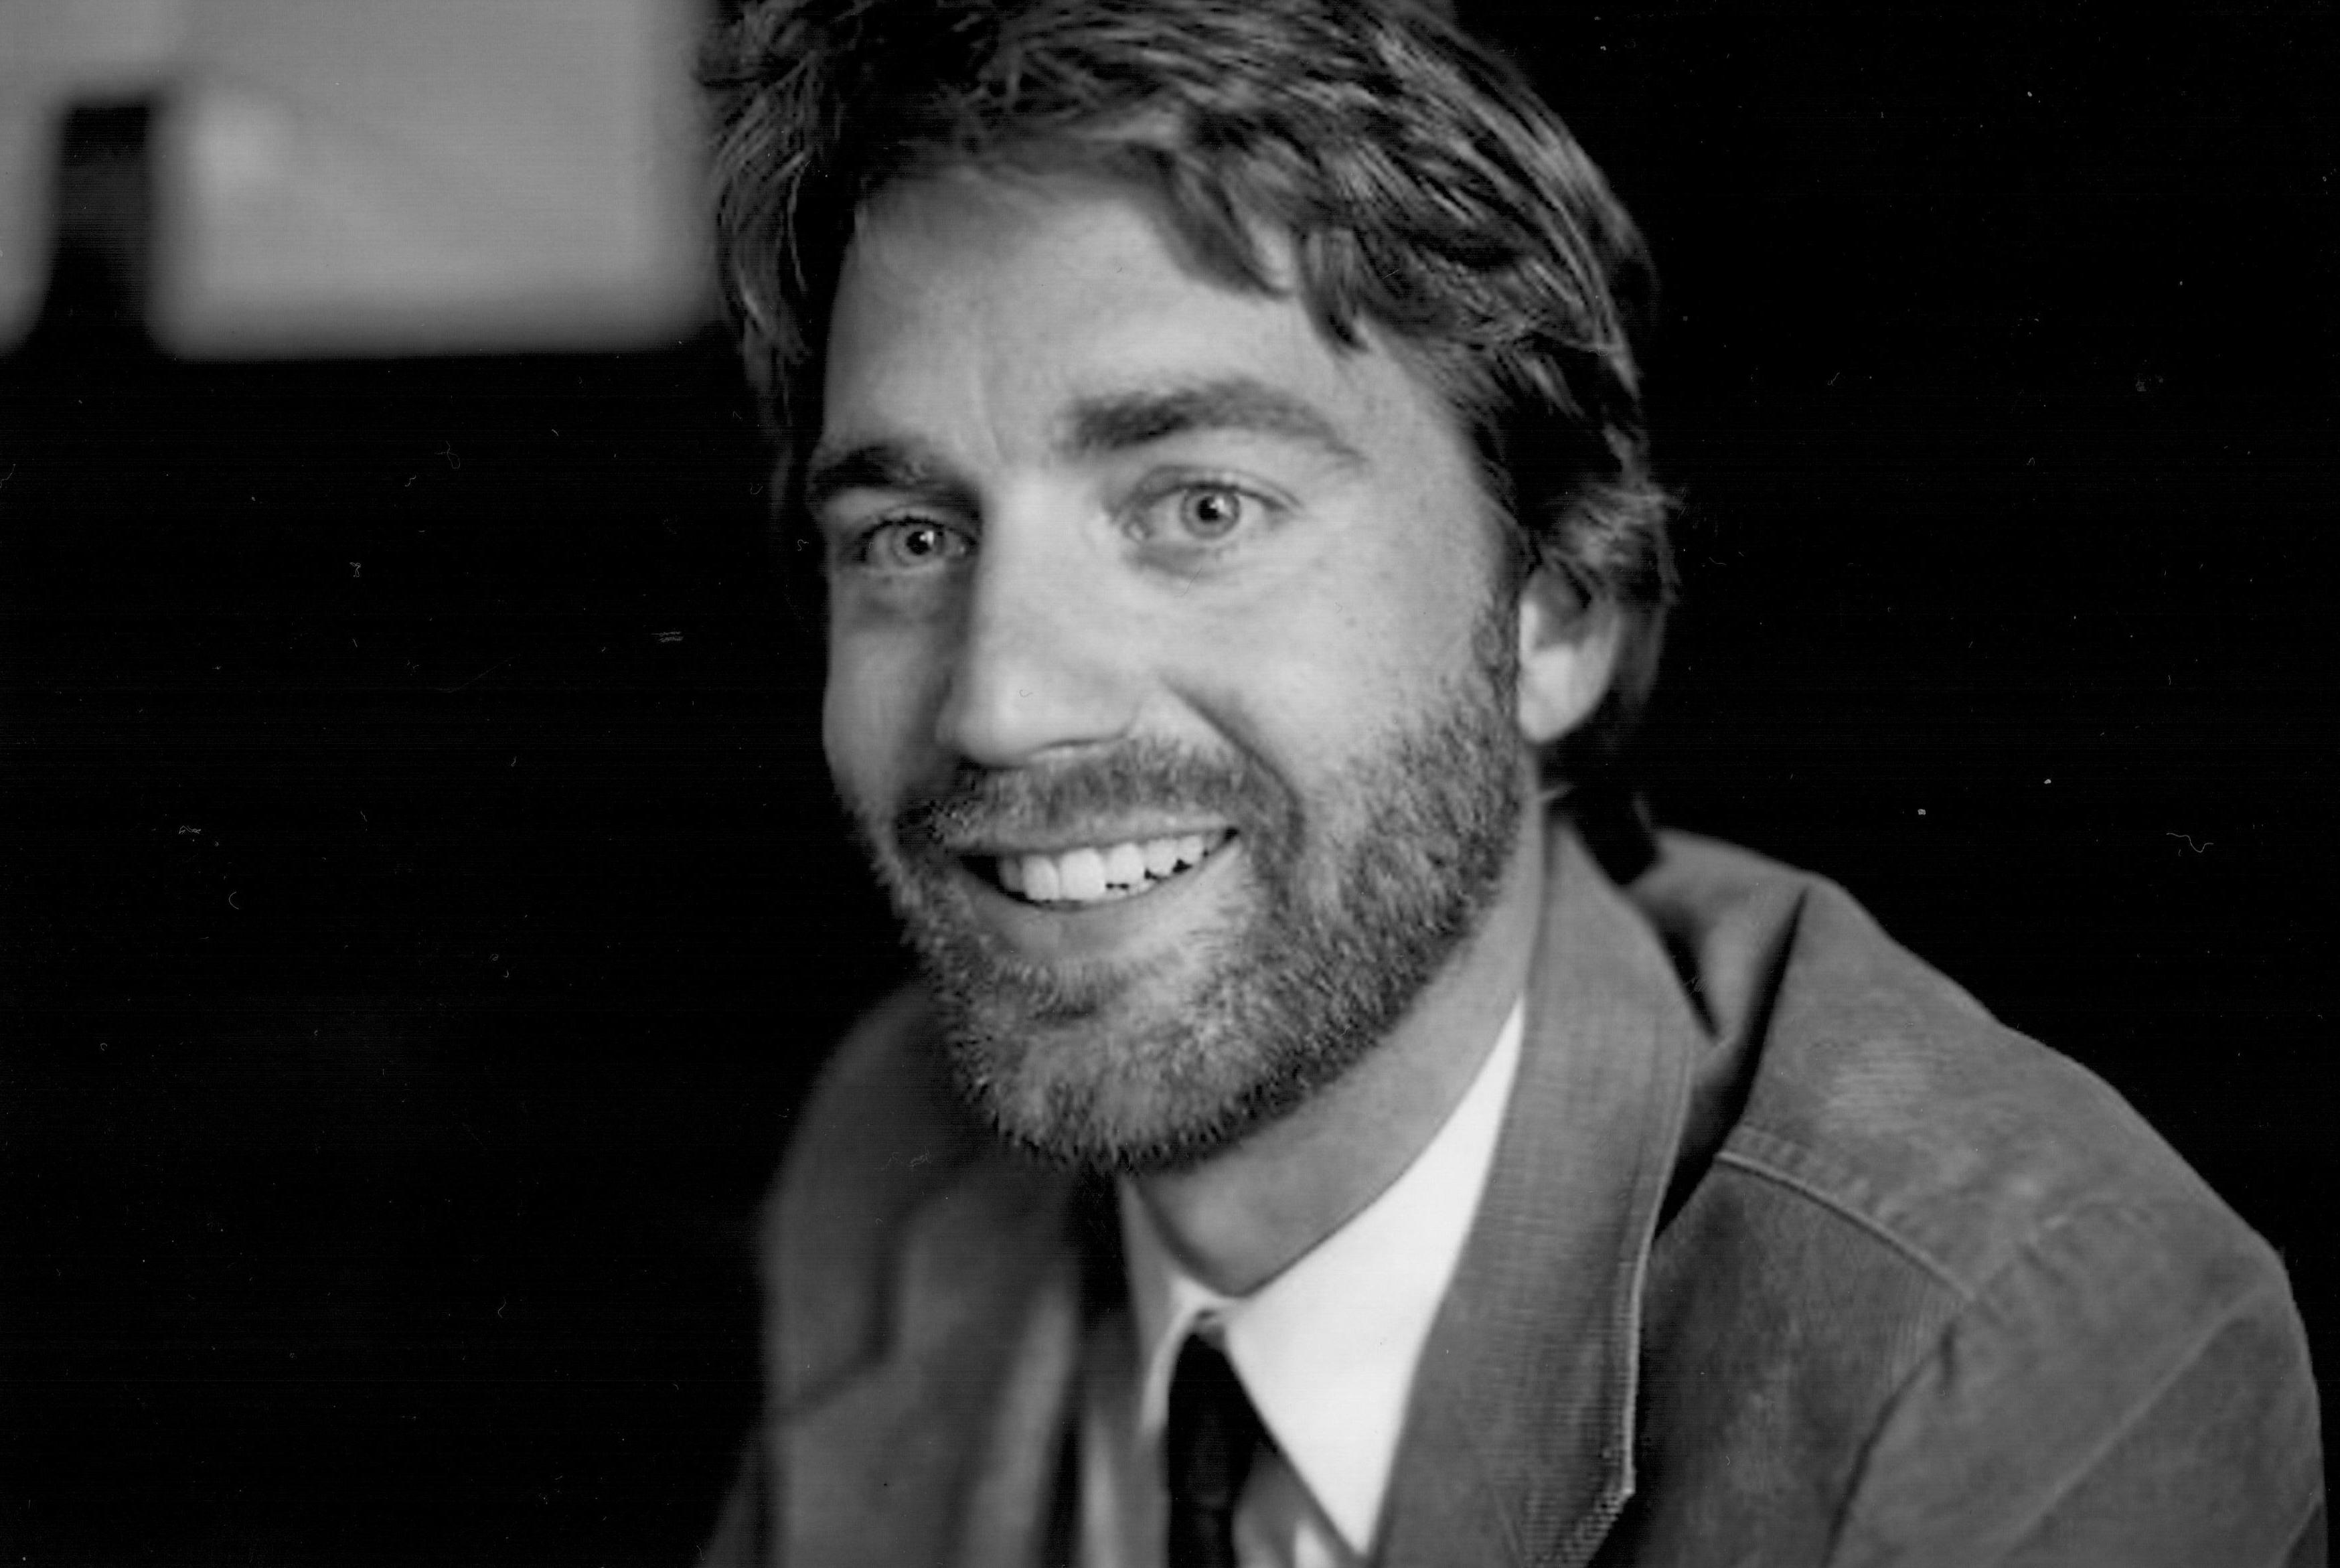 black and white headshot of man with a beard in a jacket, shirt, and tie